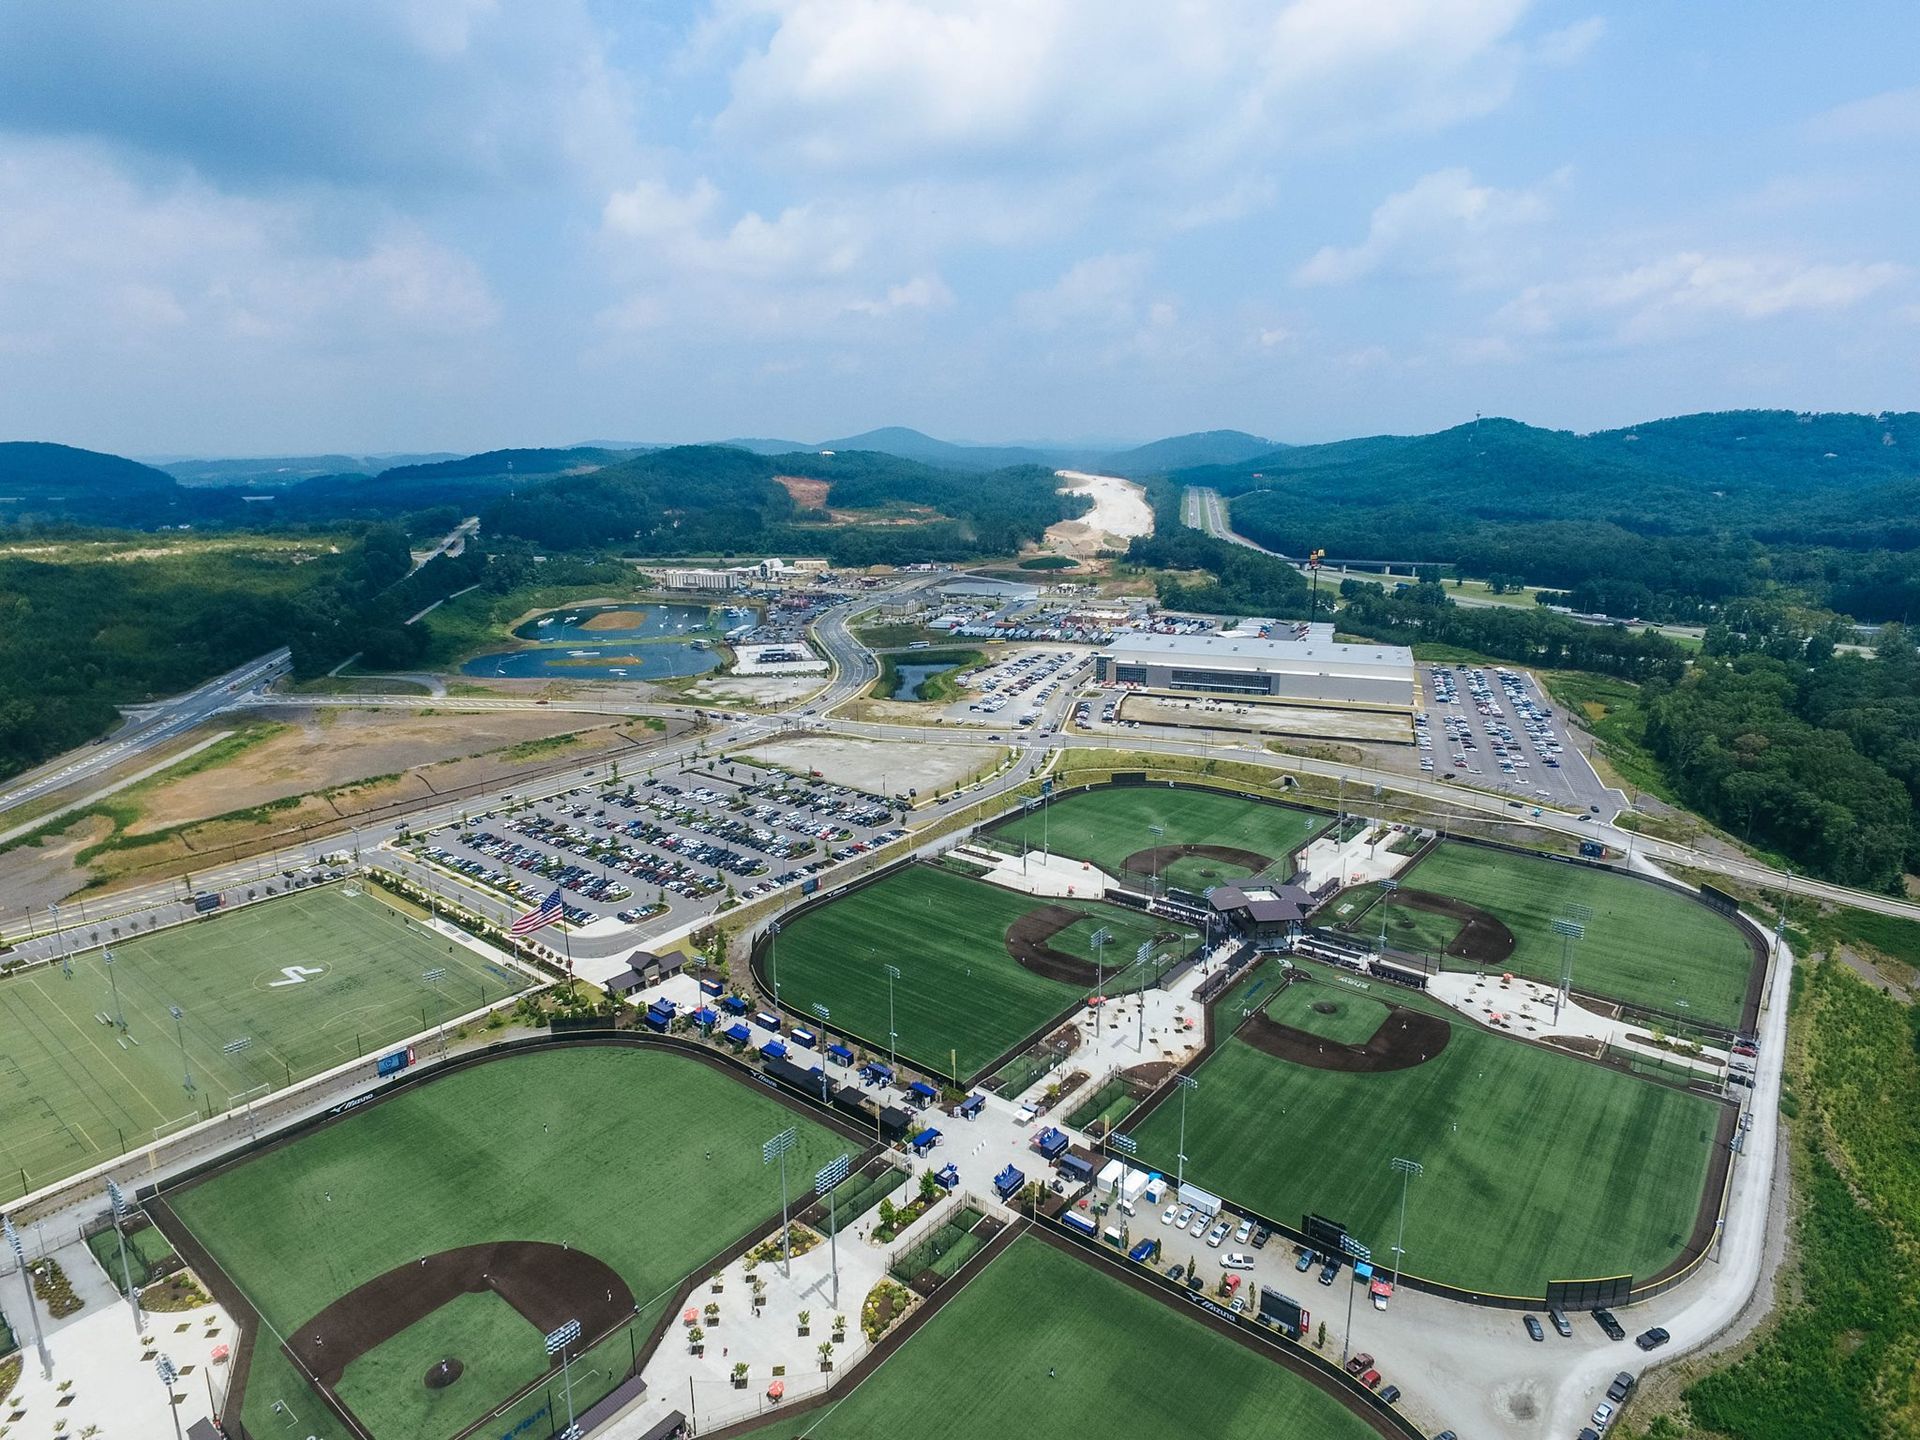 World’s Largest Sports Vacation Community: world record in Emerson, Georgia